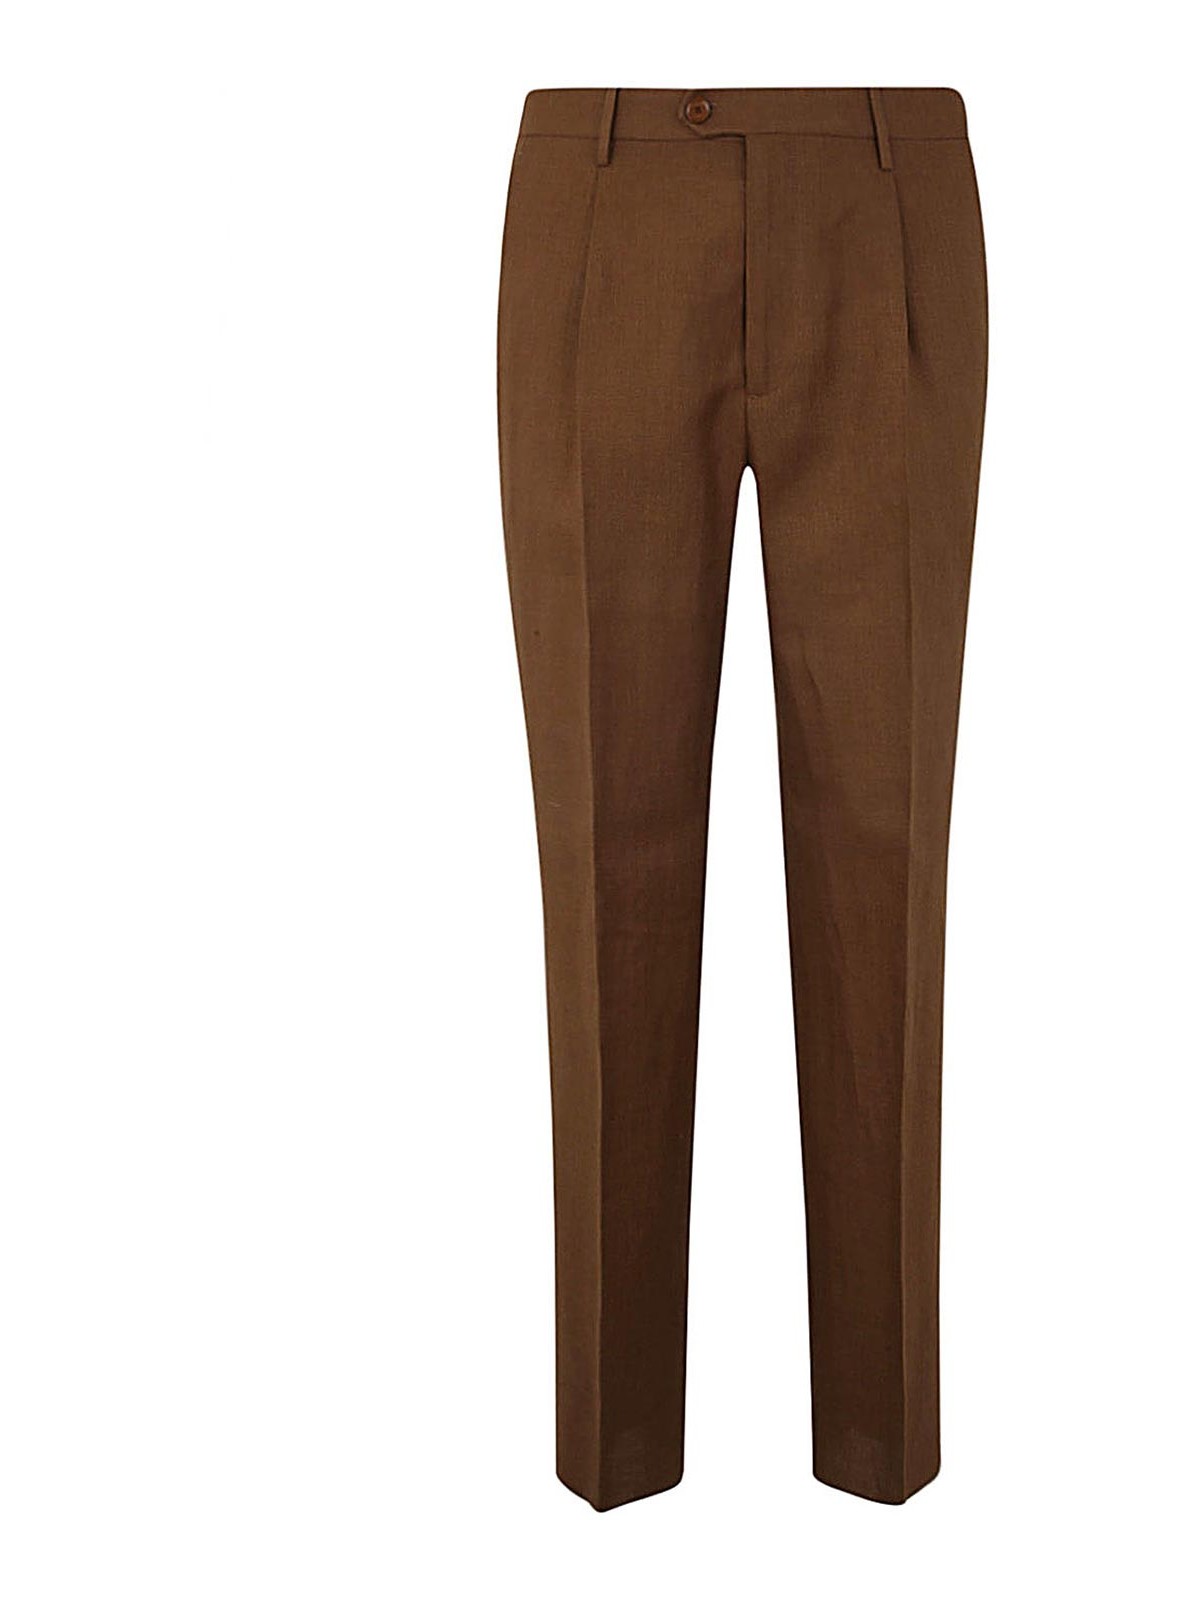 Double Pleated Single Buckle Trousers – Labour Union Clothing-Since 1986 |  Vintage Inspired Heritage Menswear